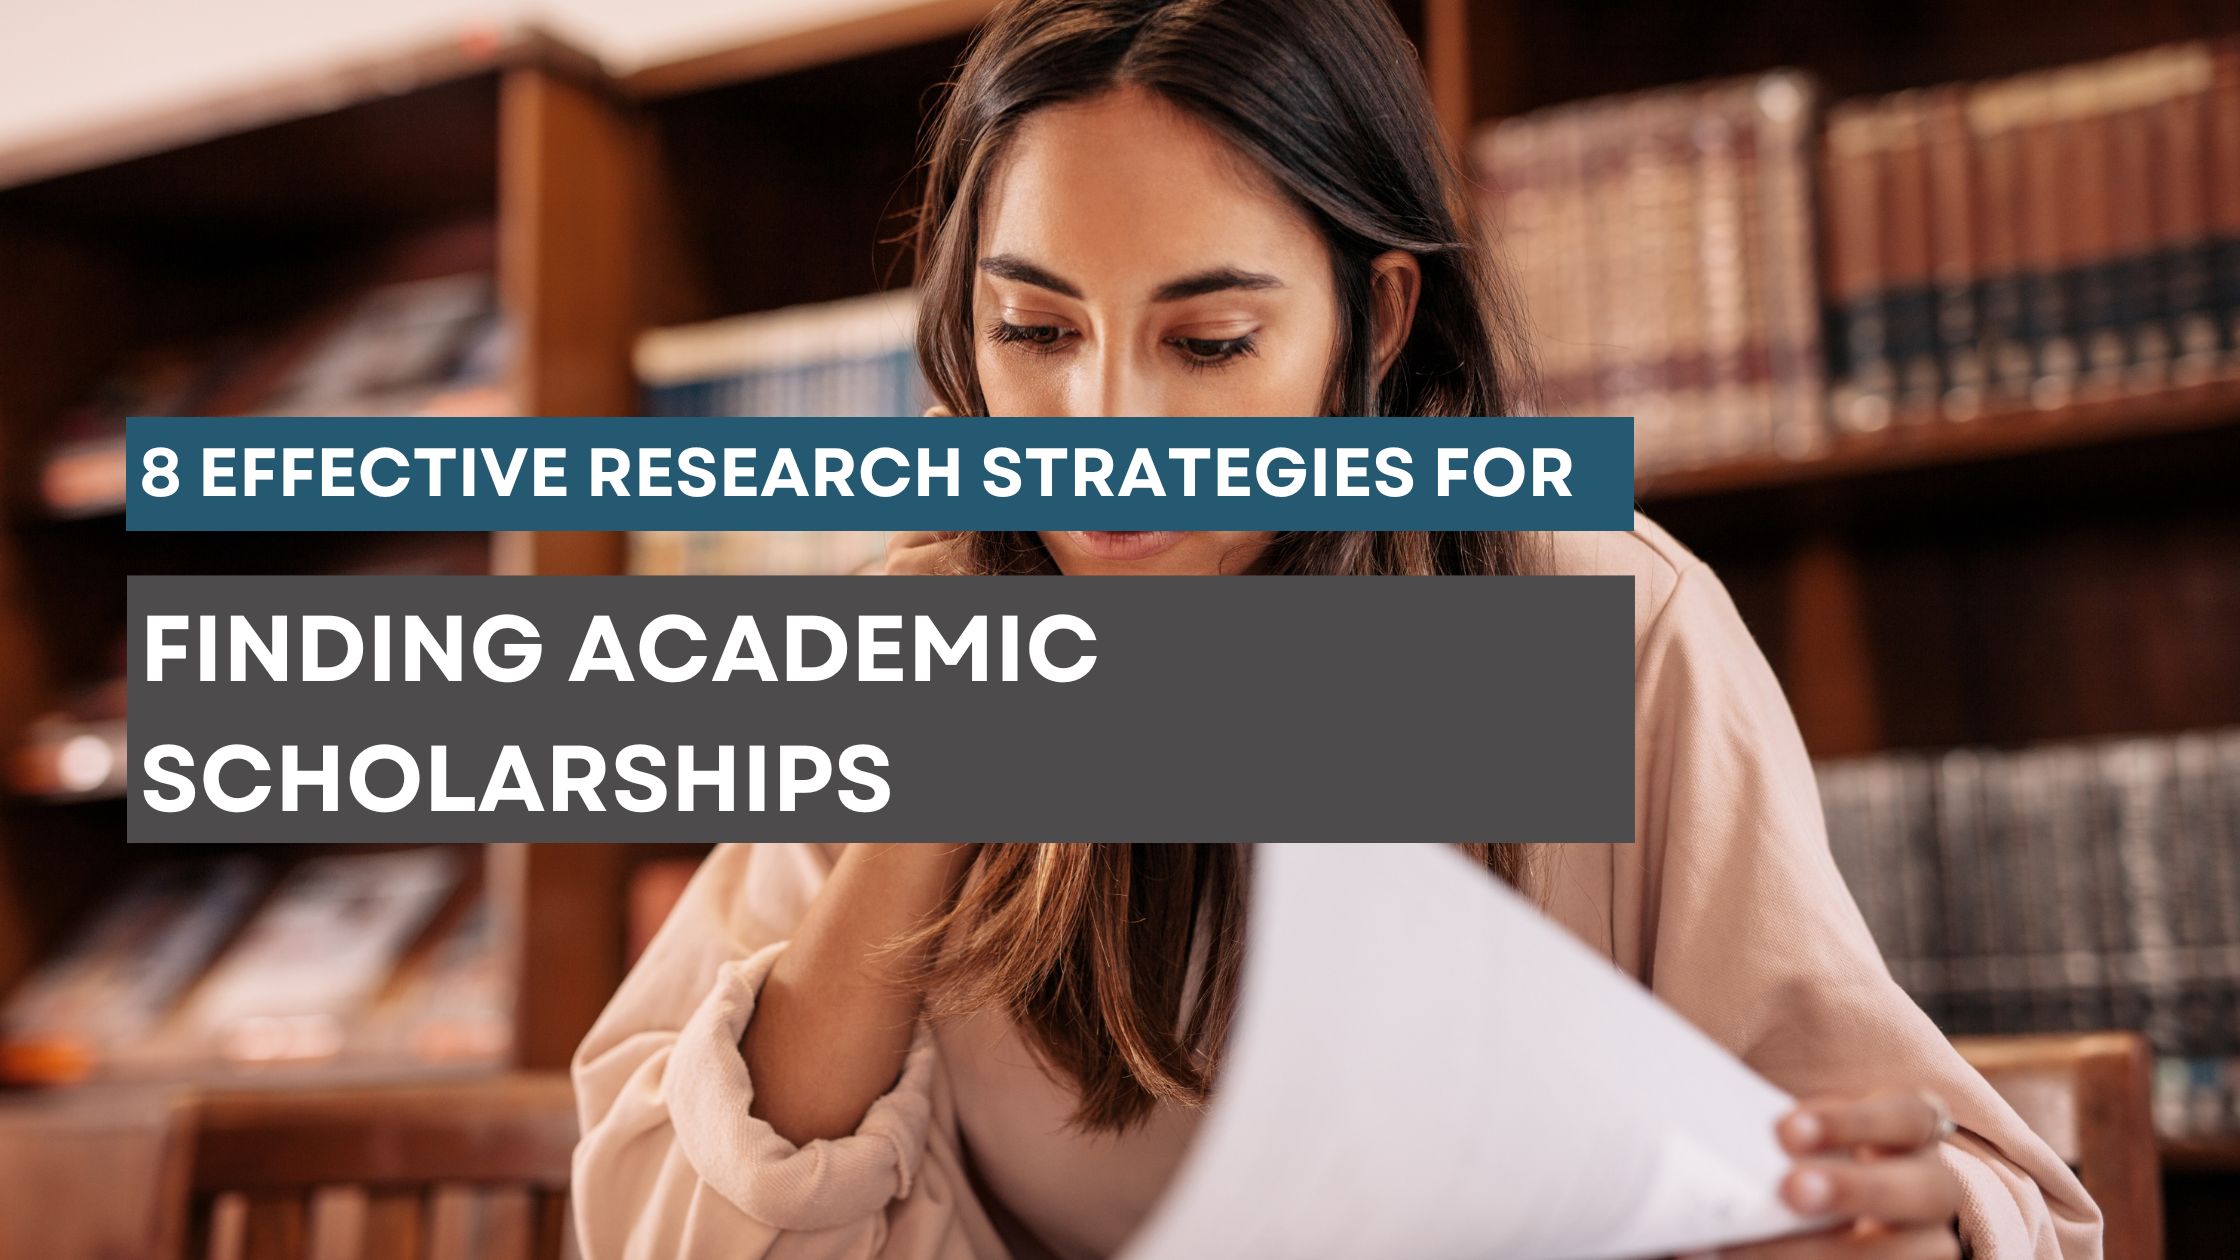 Explore 8 strategies for finding academic scholarships efficiently on estudent360.com: A guide to effective scholarship research methods.